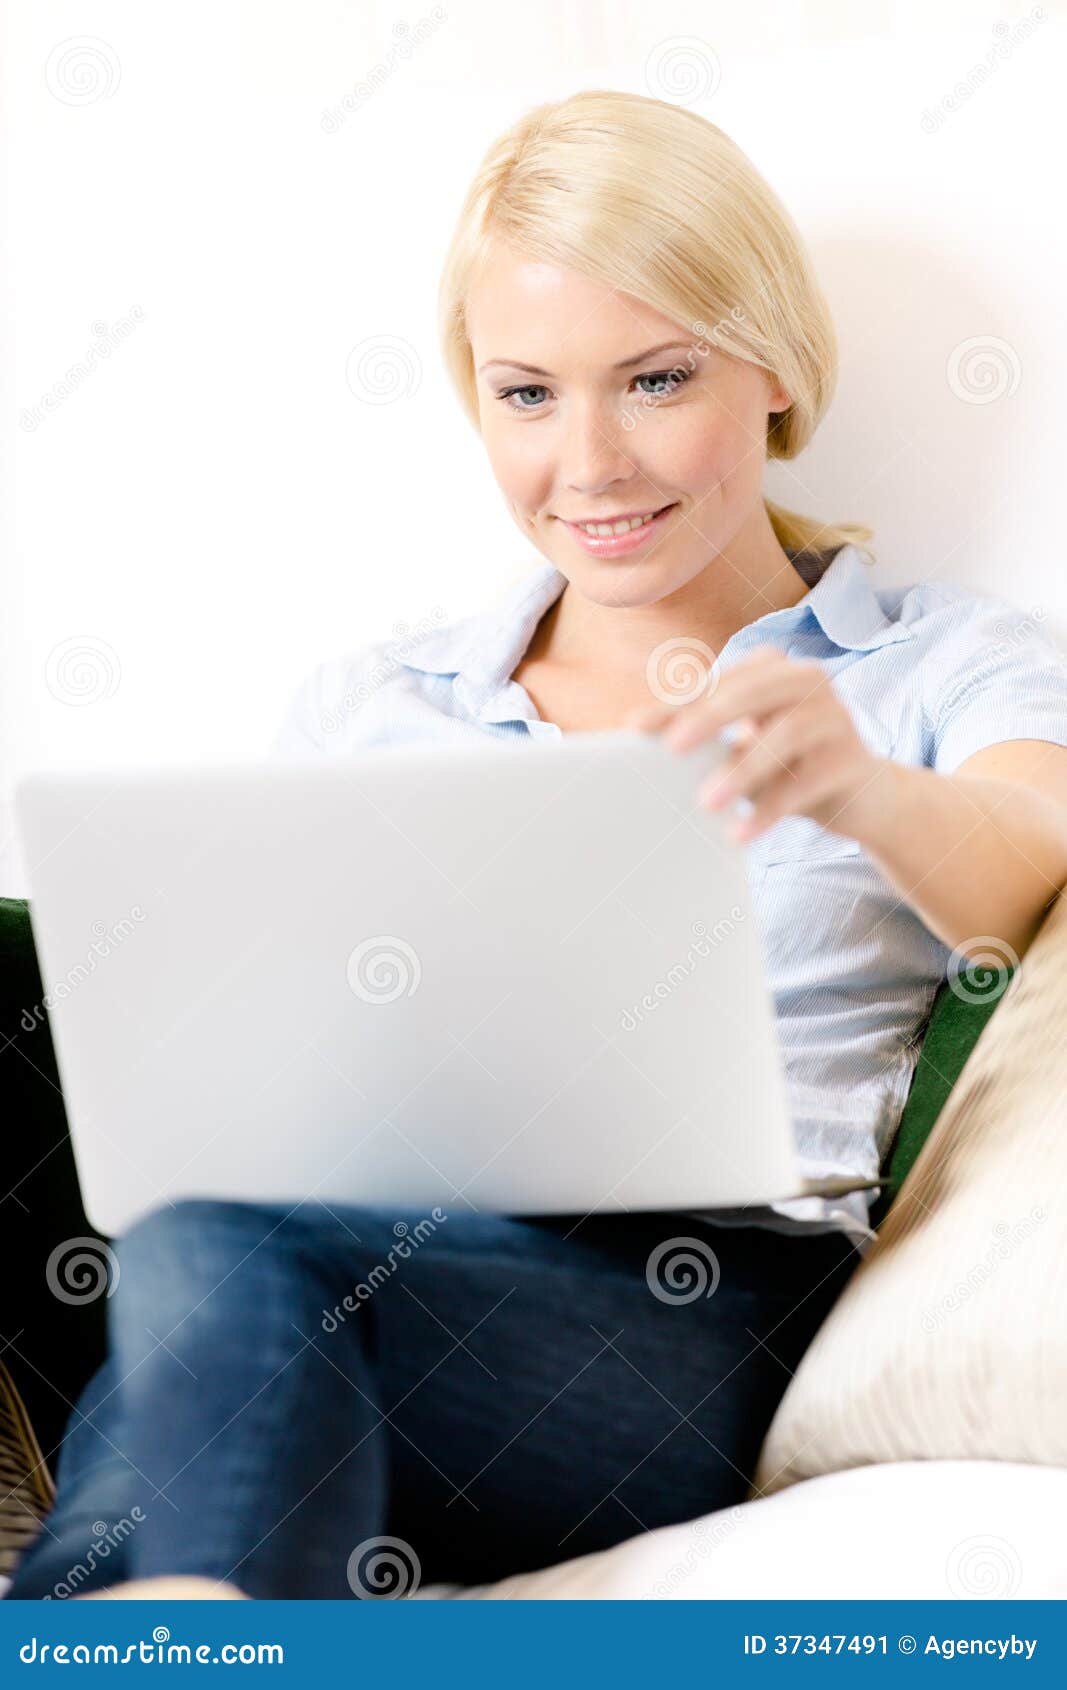 Woman Sitting with Computer Stock Image - Image of lifestyle, learn ...